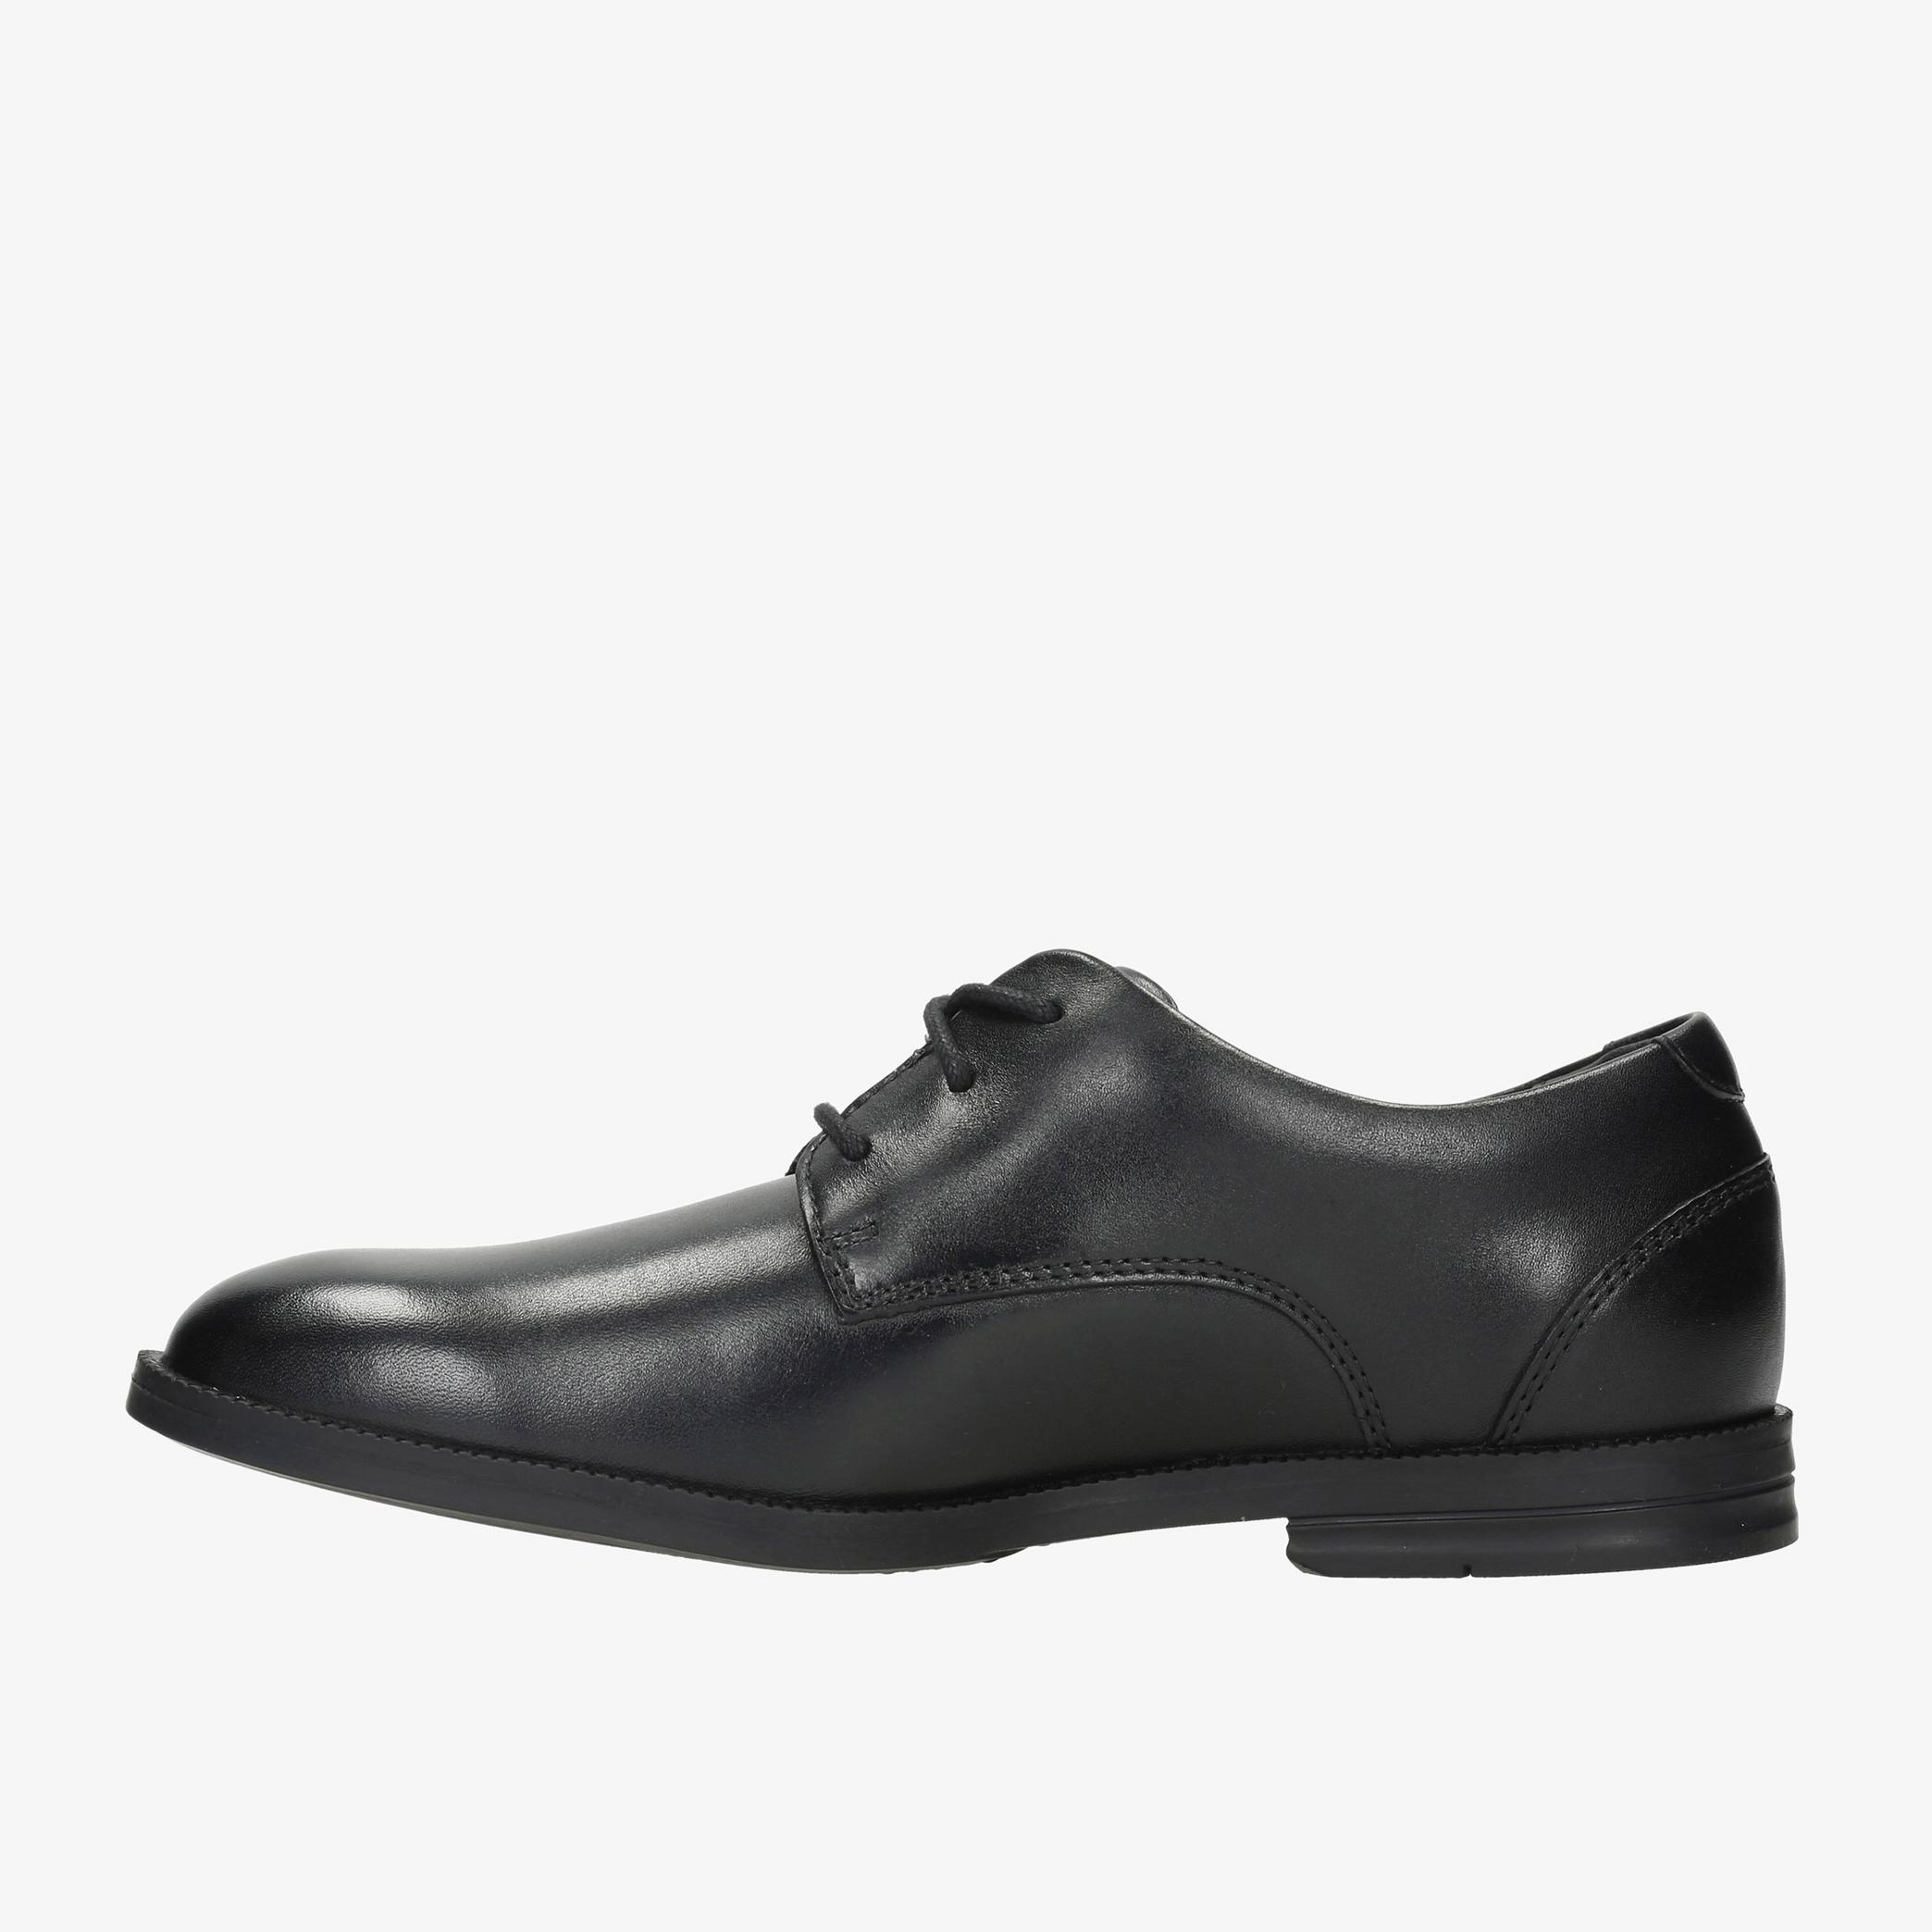 Rufus Edge Youth Black Leather Shoes, view 2 of 6